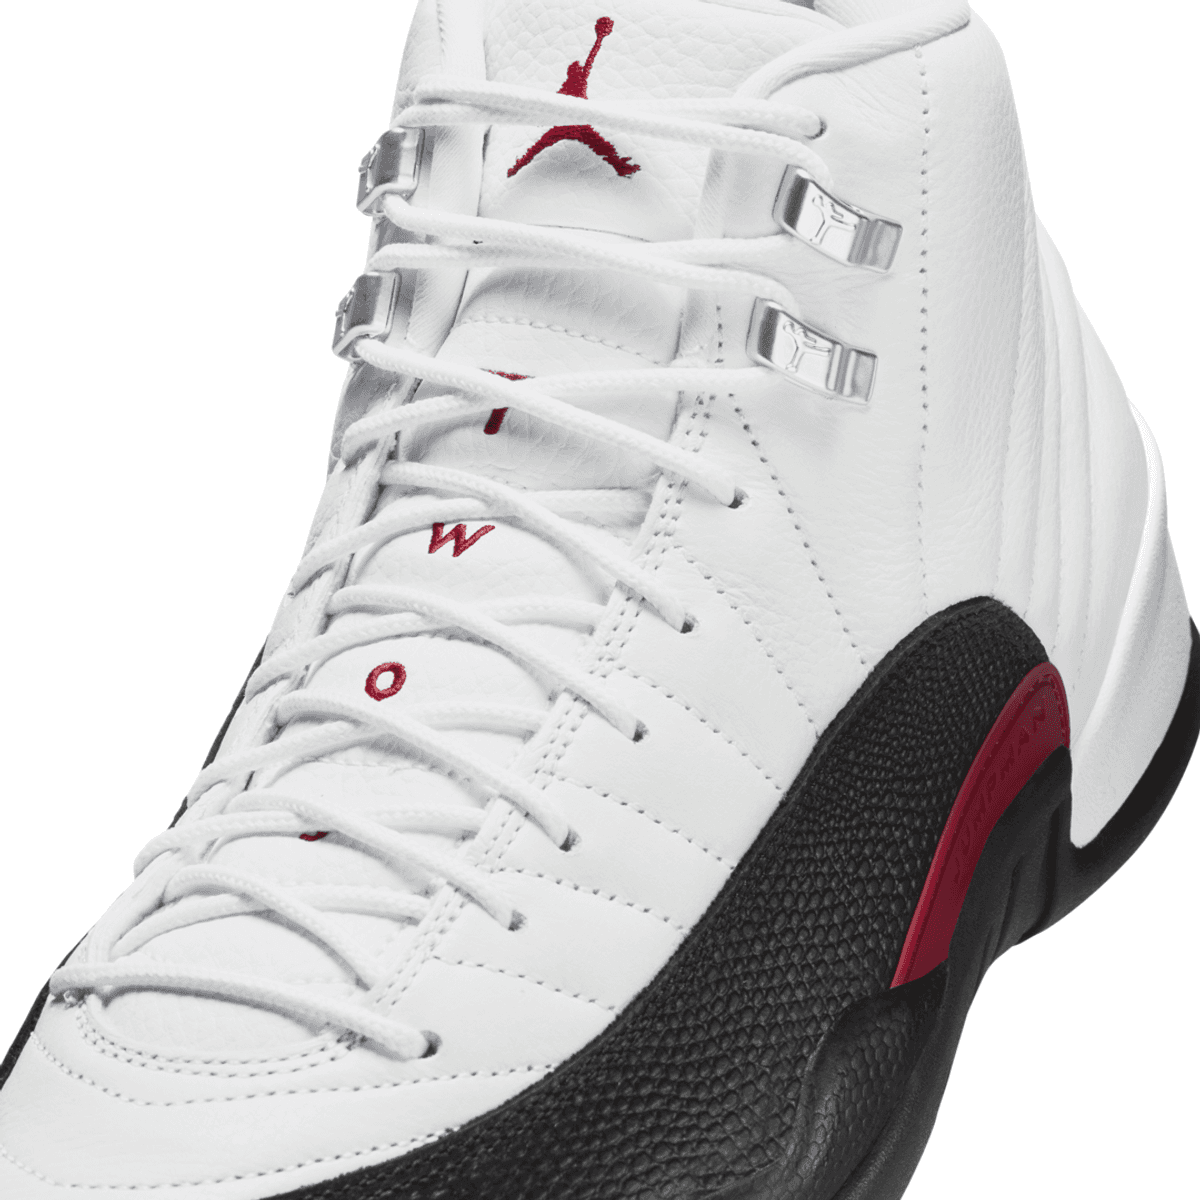 The Air Jordan 12 "Red Taxi" Releases In May